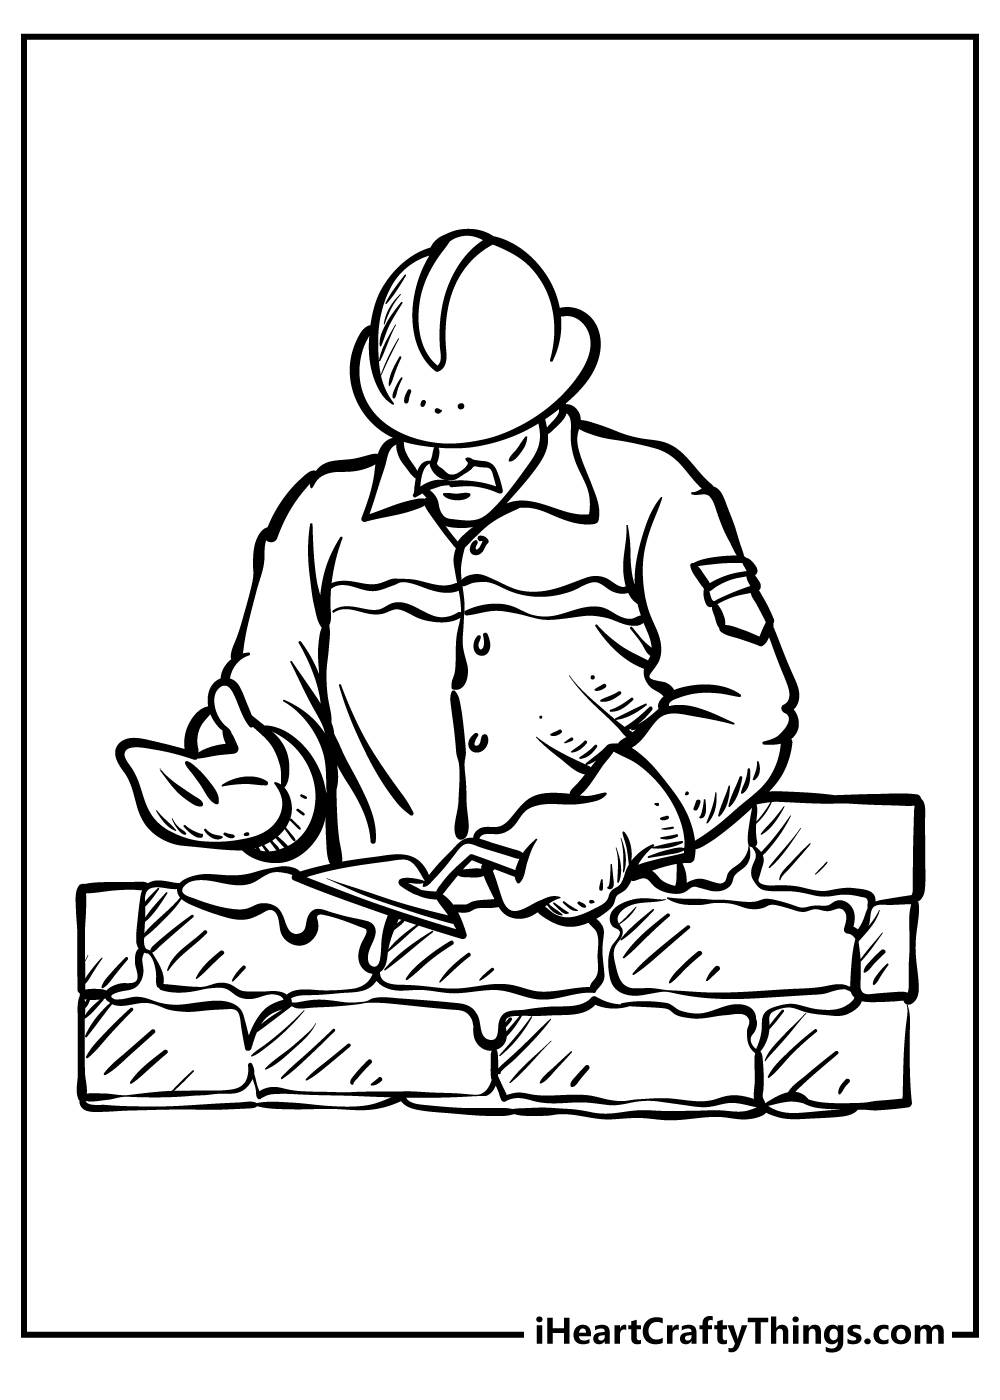 CARPENTER coloring pages - Color each tool  Preschool coloring pages,  Coloring pages for kids, Coloring pages